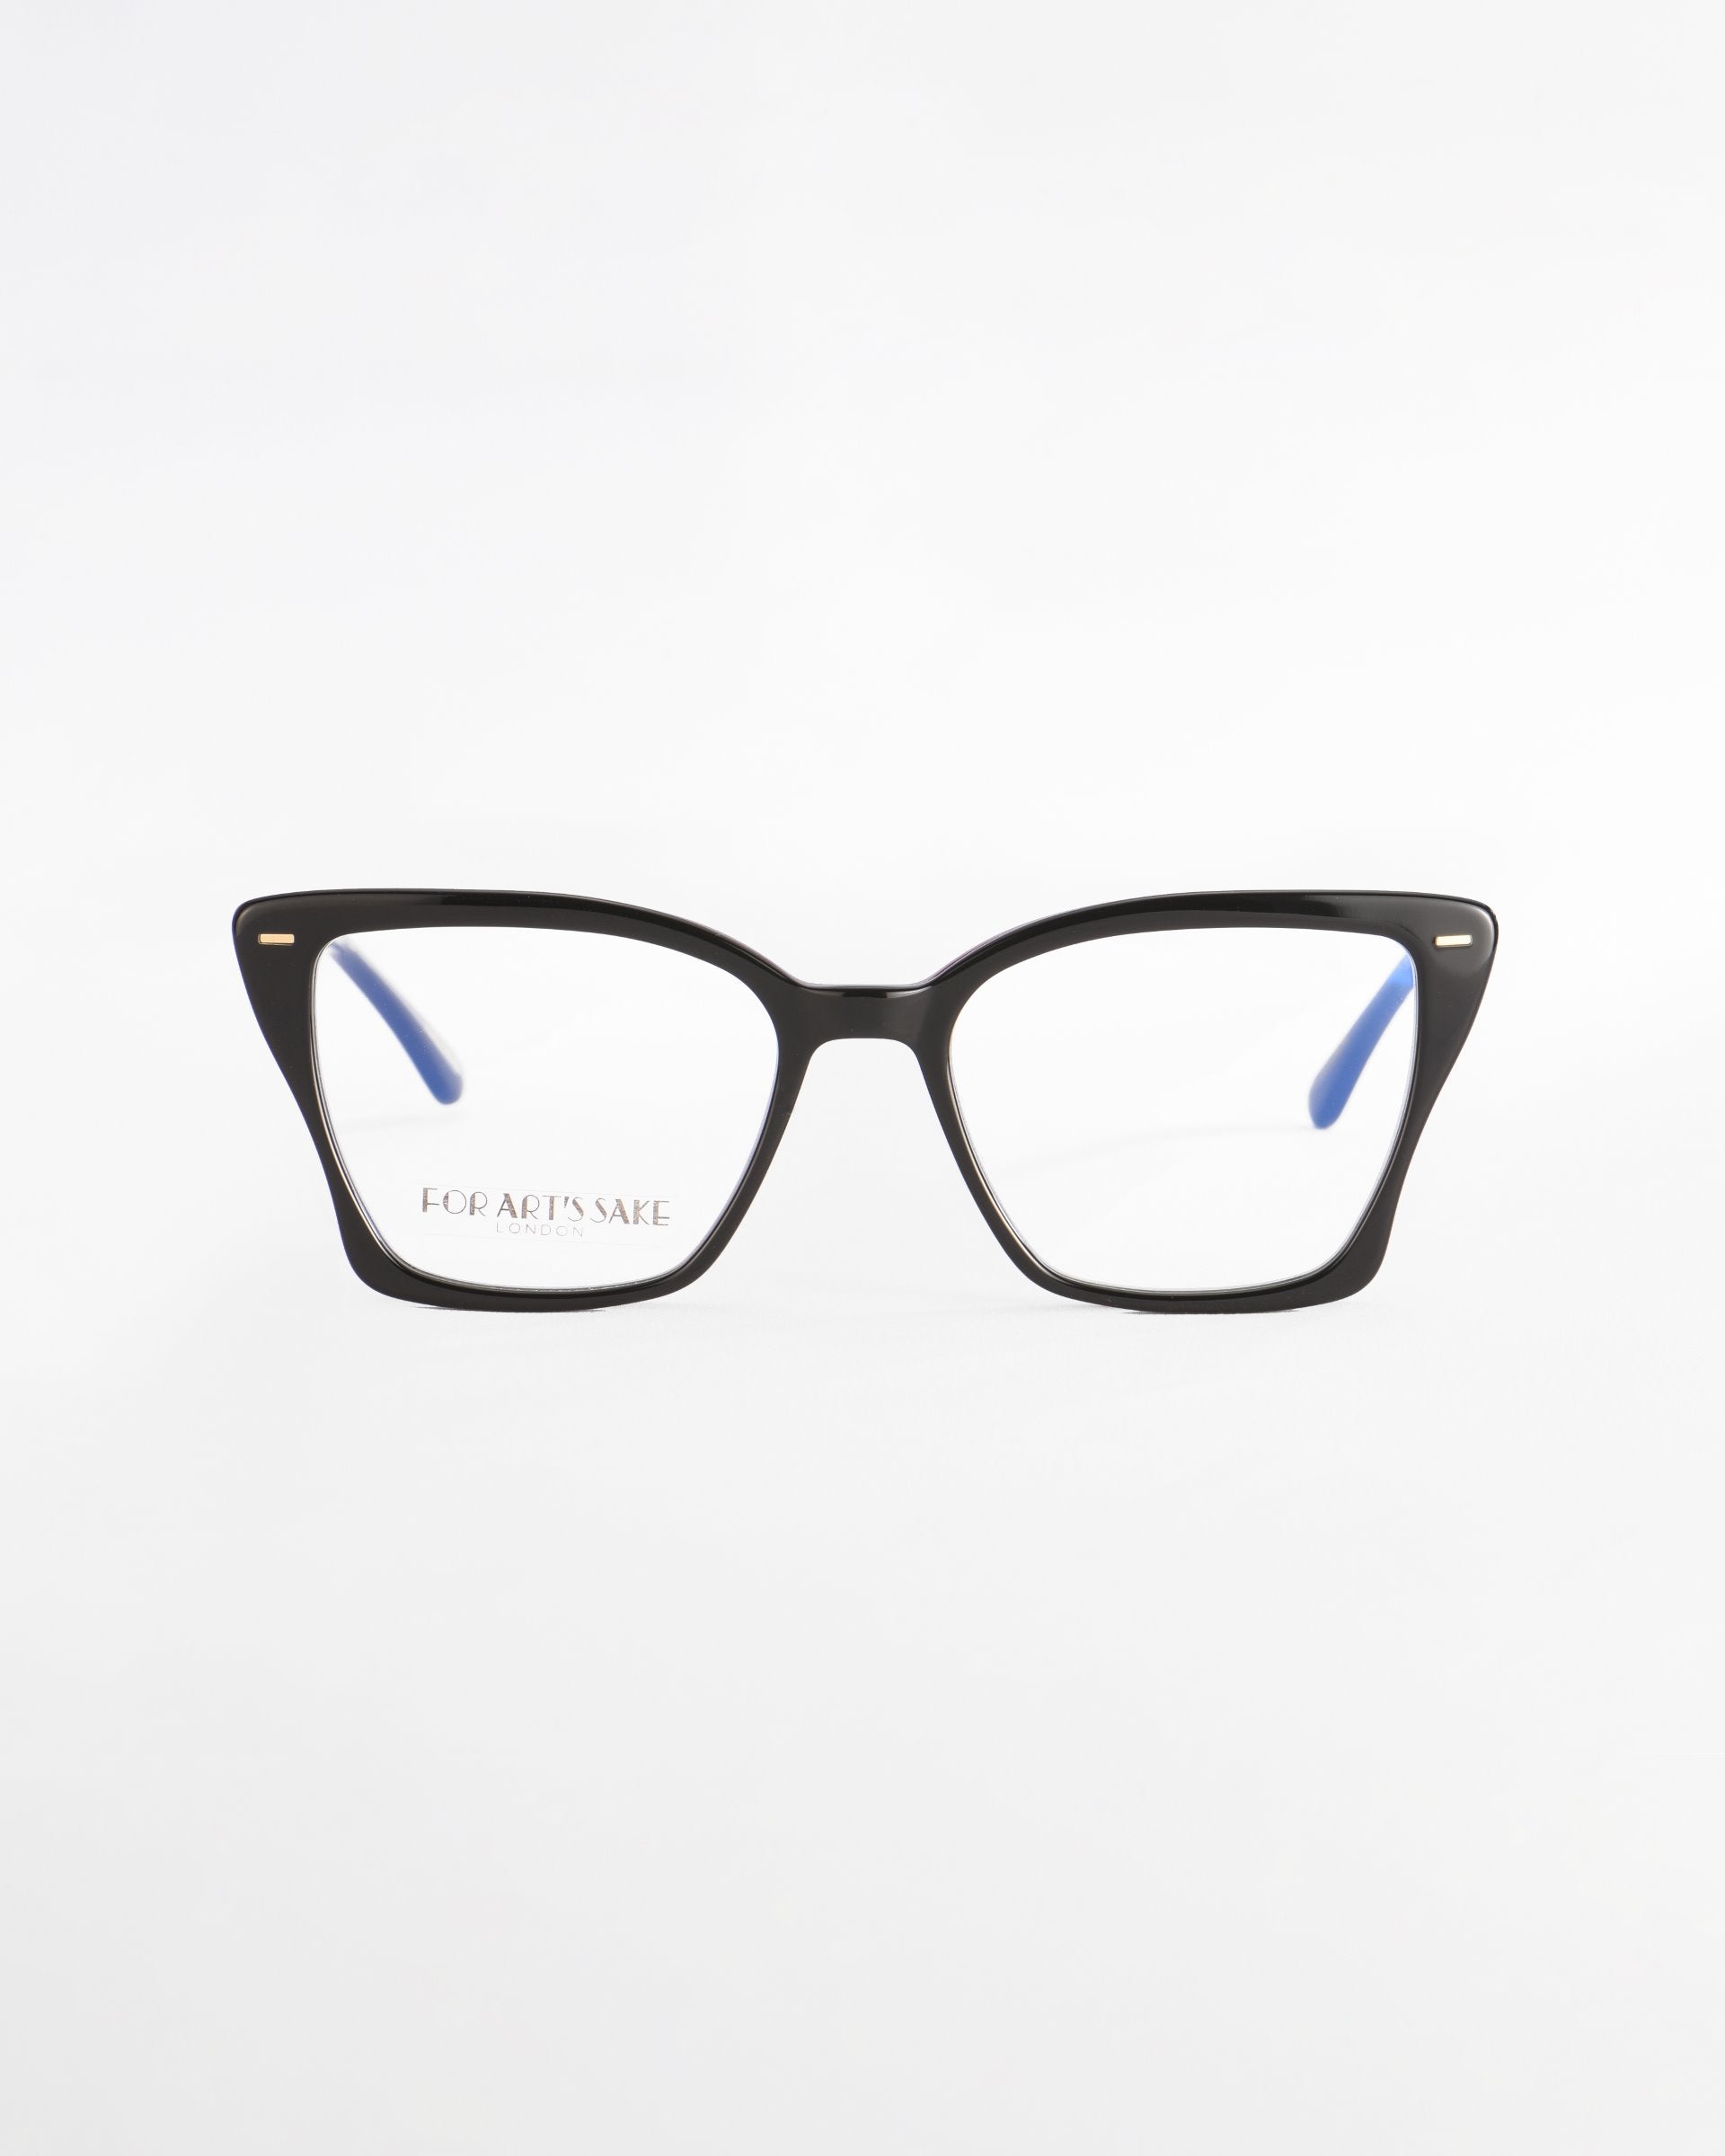 A pair of stylish black cat-eye Dion eyeglasses with thin blue temples and tortoiseshell frames. The lenses are clear and offer UV protection, featuring an engraving &quot;FOR ART&#39;S SAKE®&quot; on the left lens. The glasses are positioned against a plain white background.